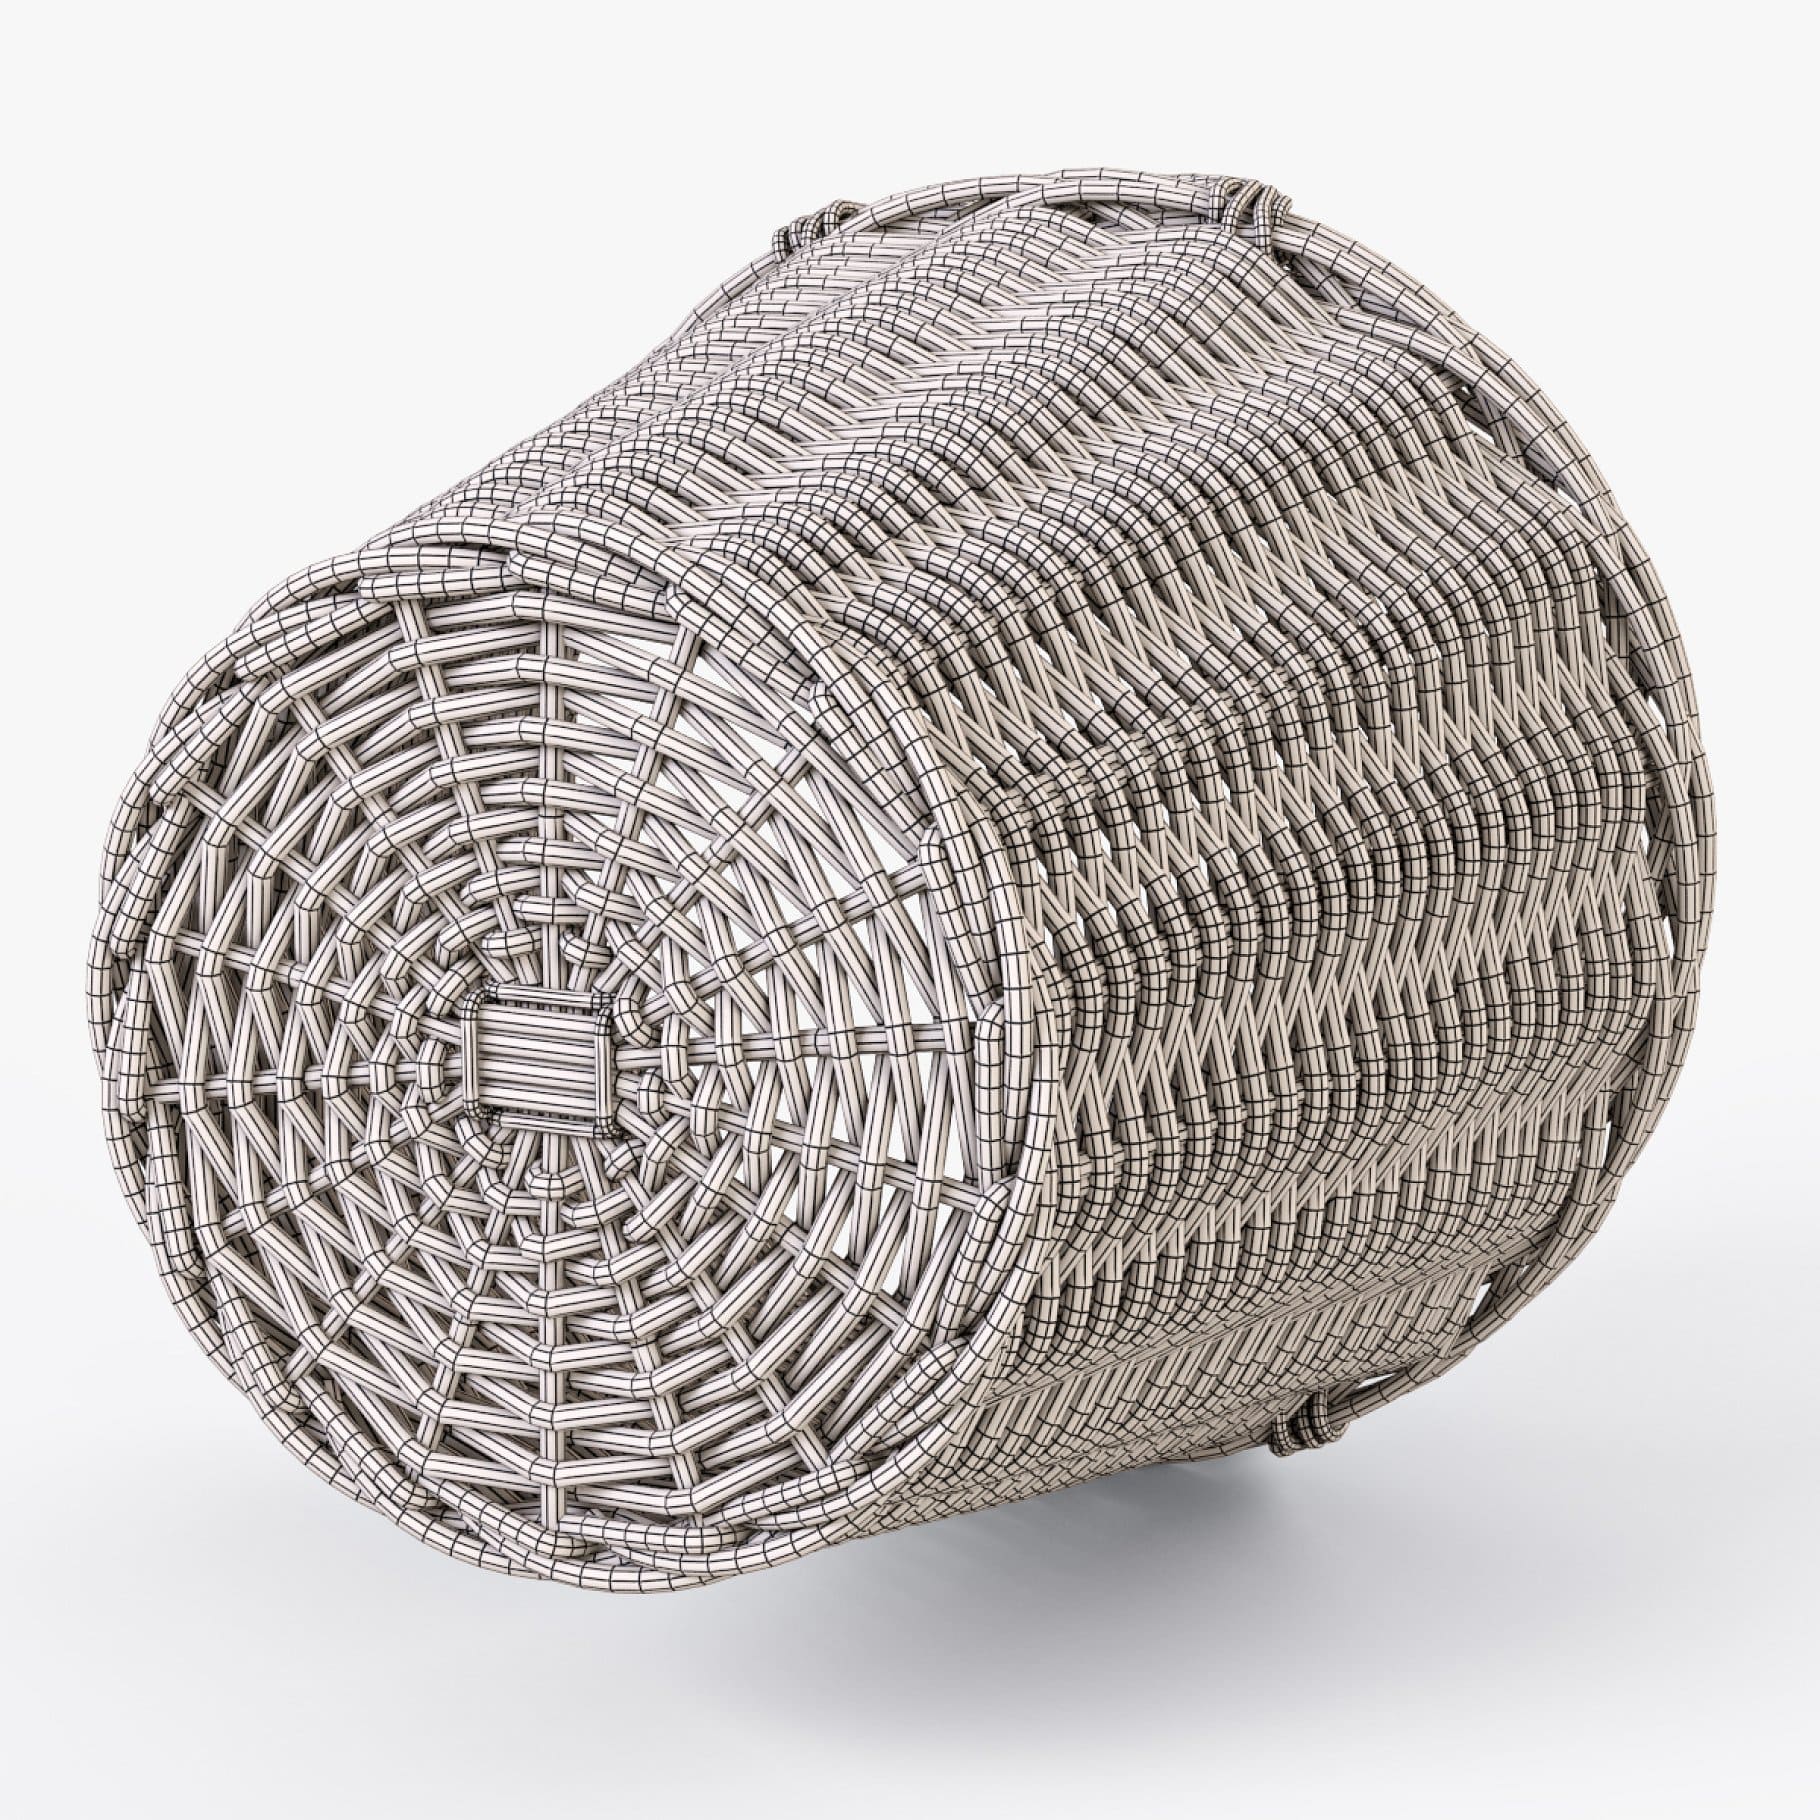 A 3D model of a basket lying on its side is drawn on a white background.